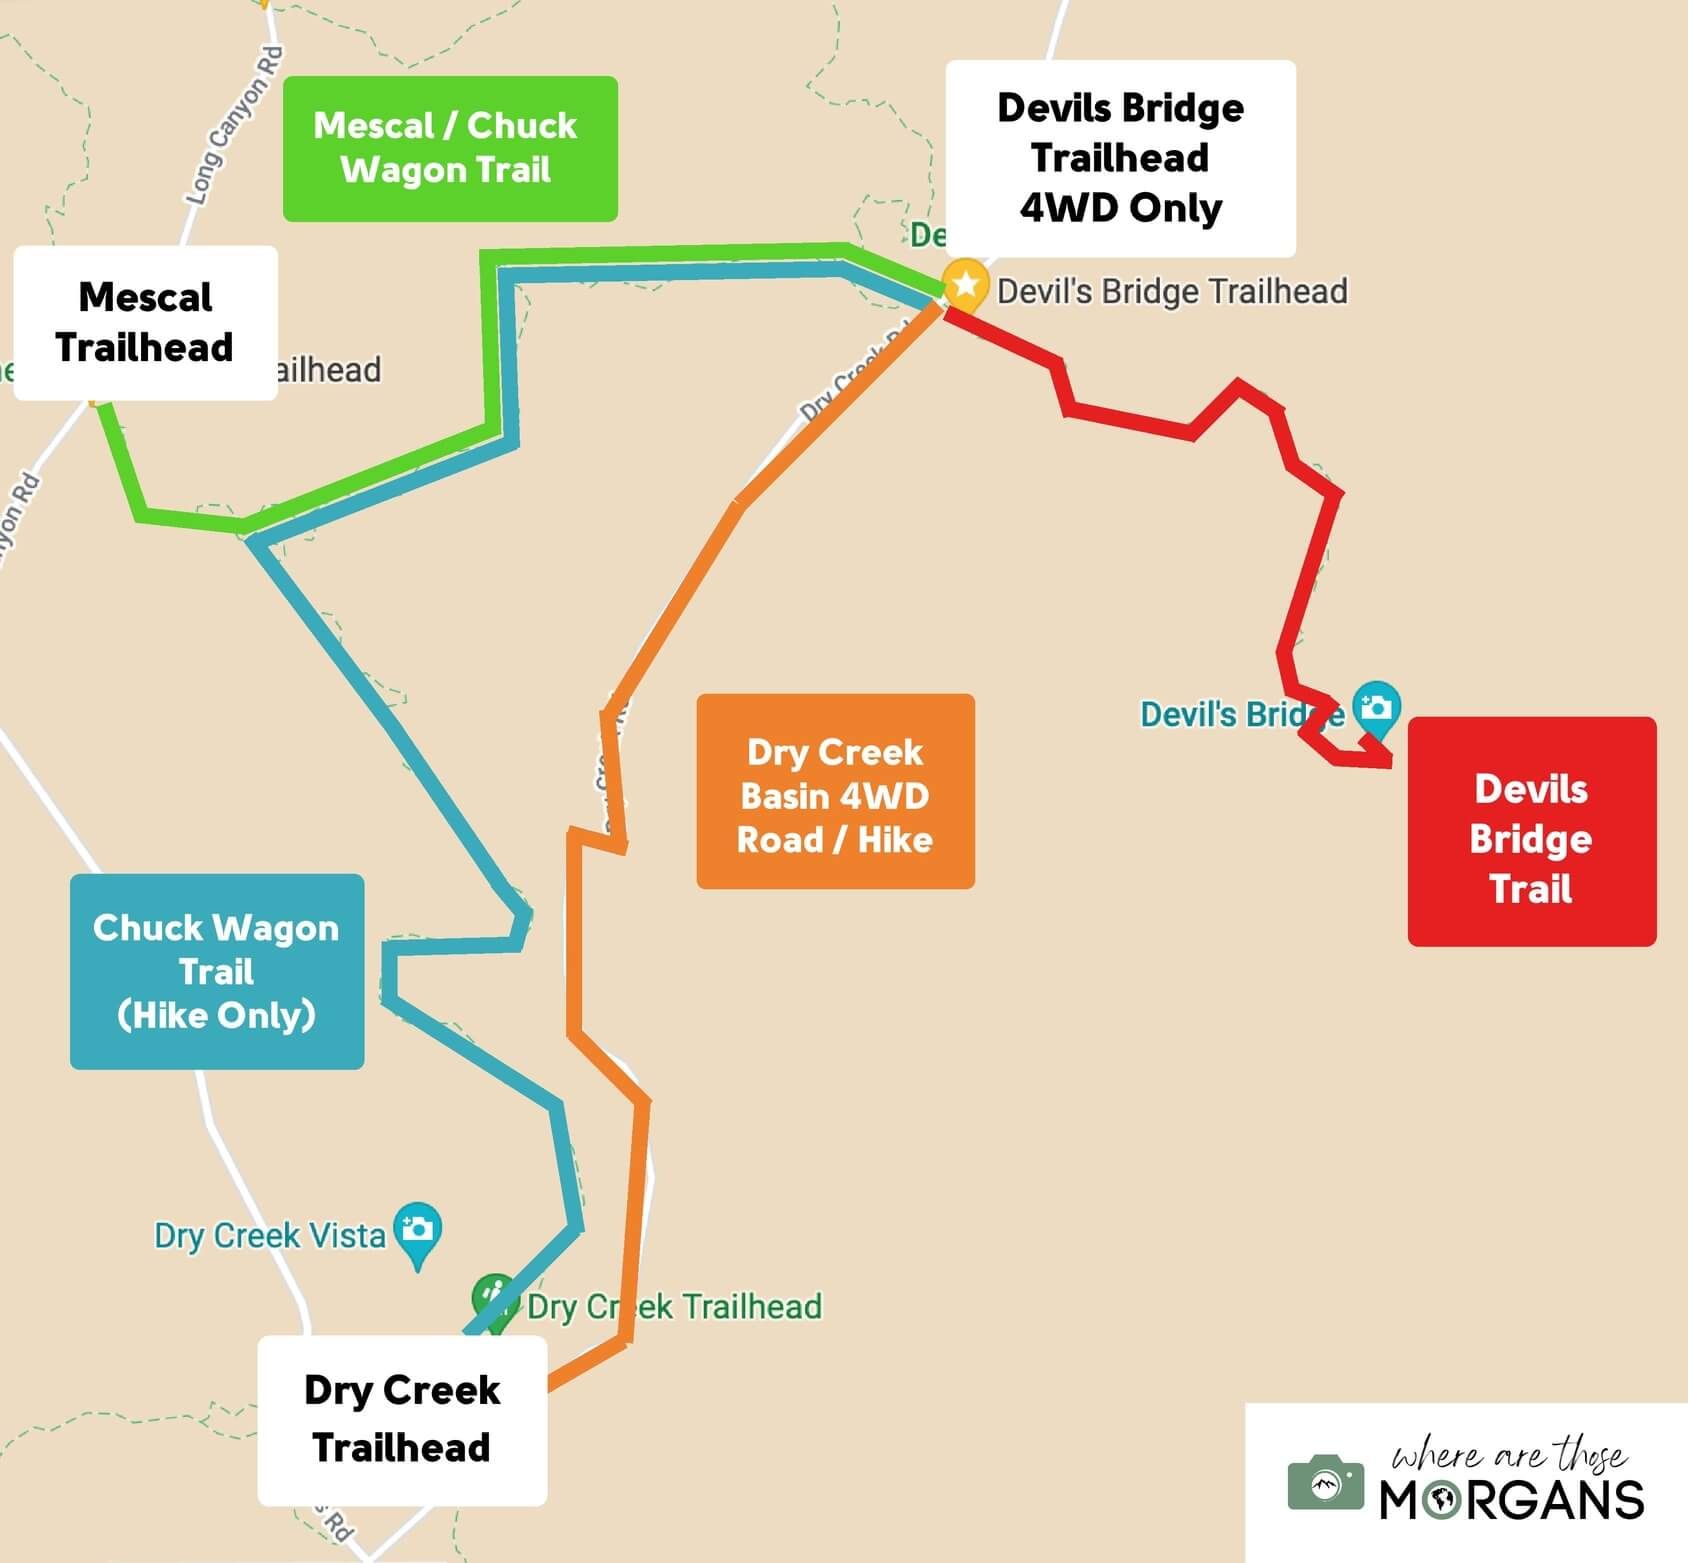 Map showing parking and trails options for the Devils Bridge hike in Sedona